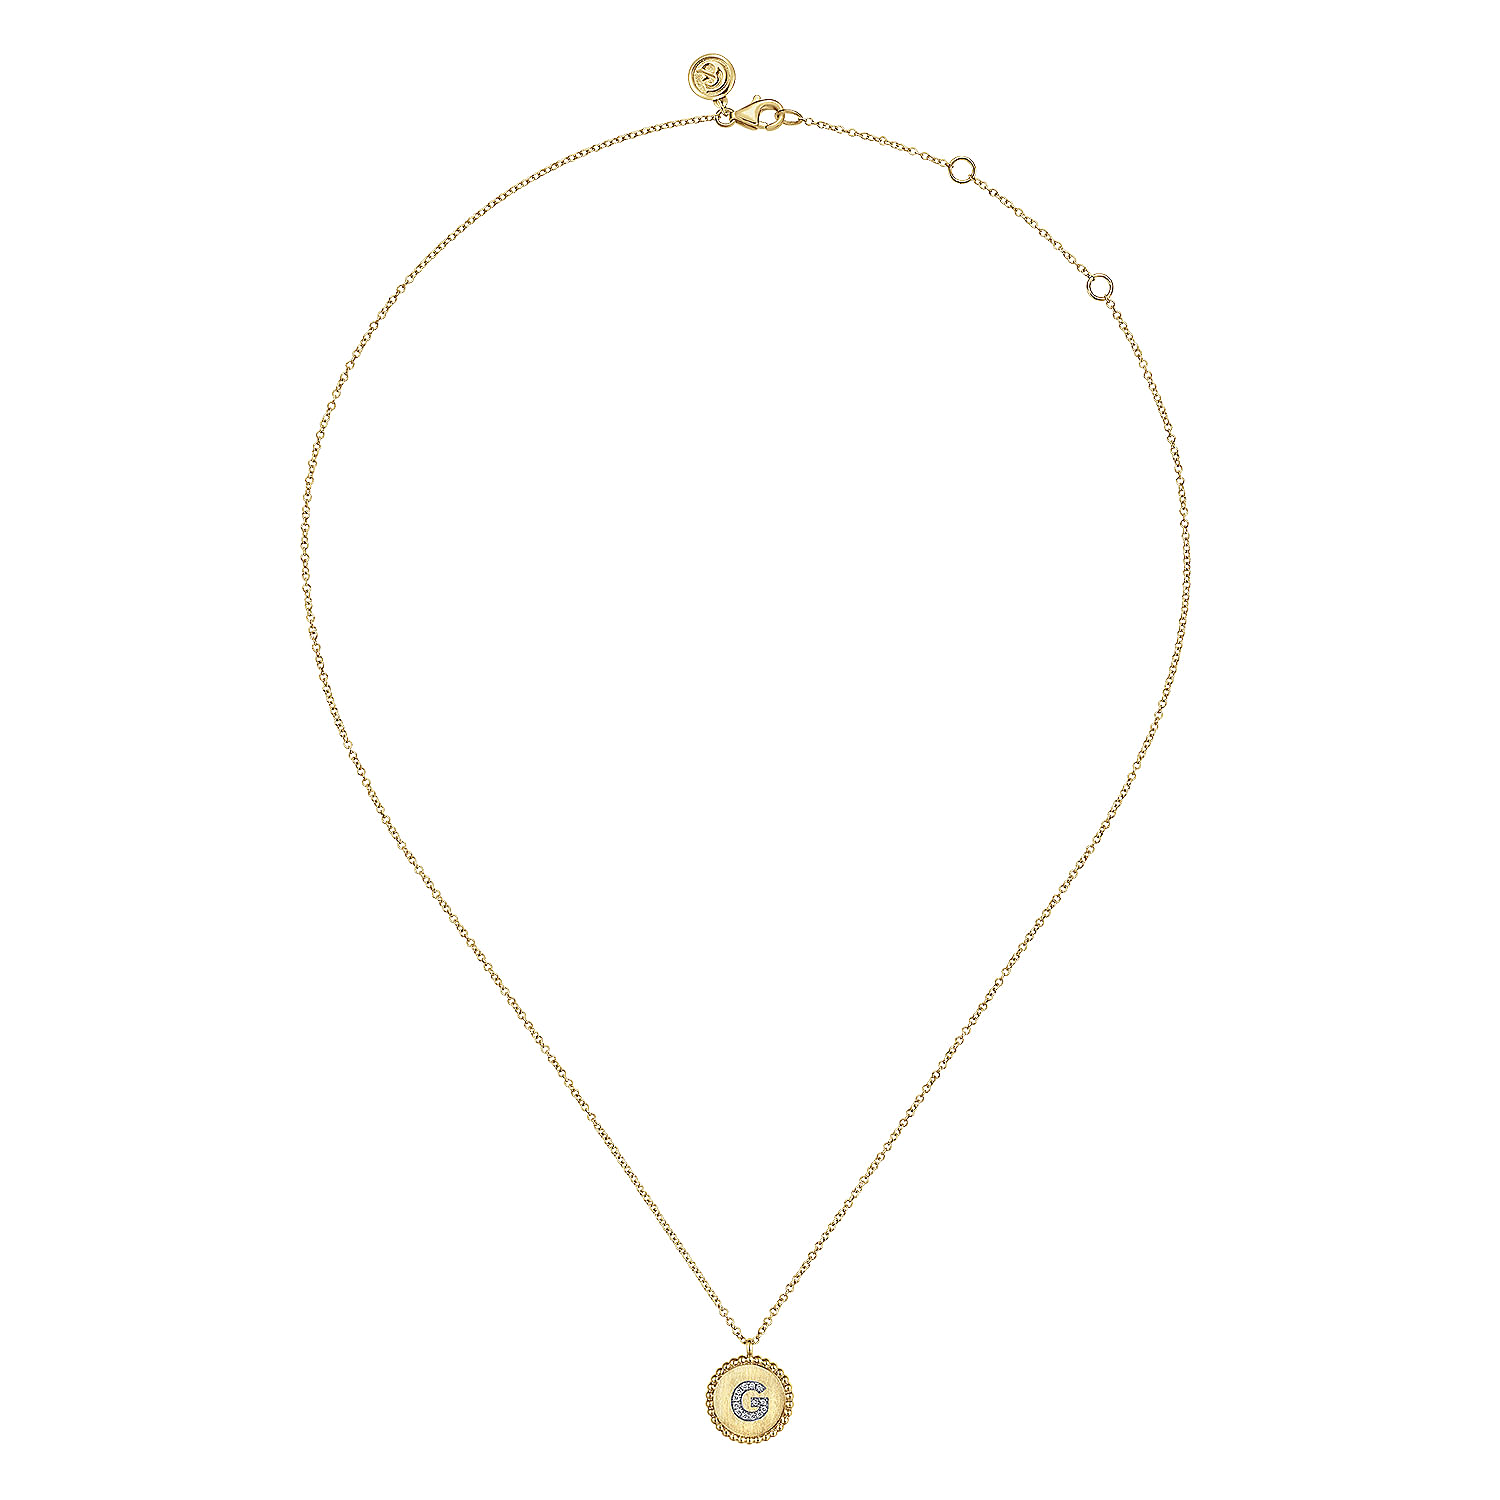 14K Yellow Gold Round G Initial Pendant Necklace with Diamonds